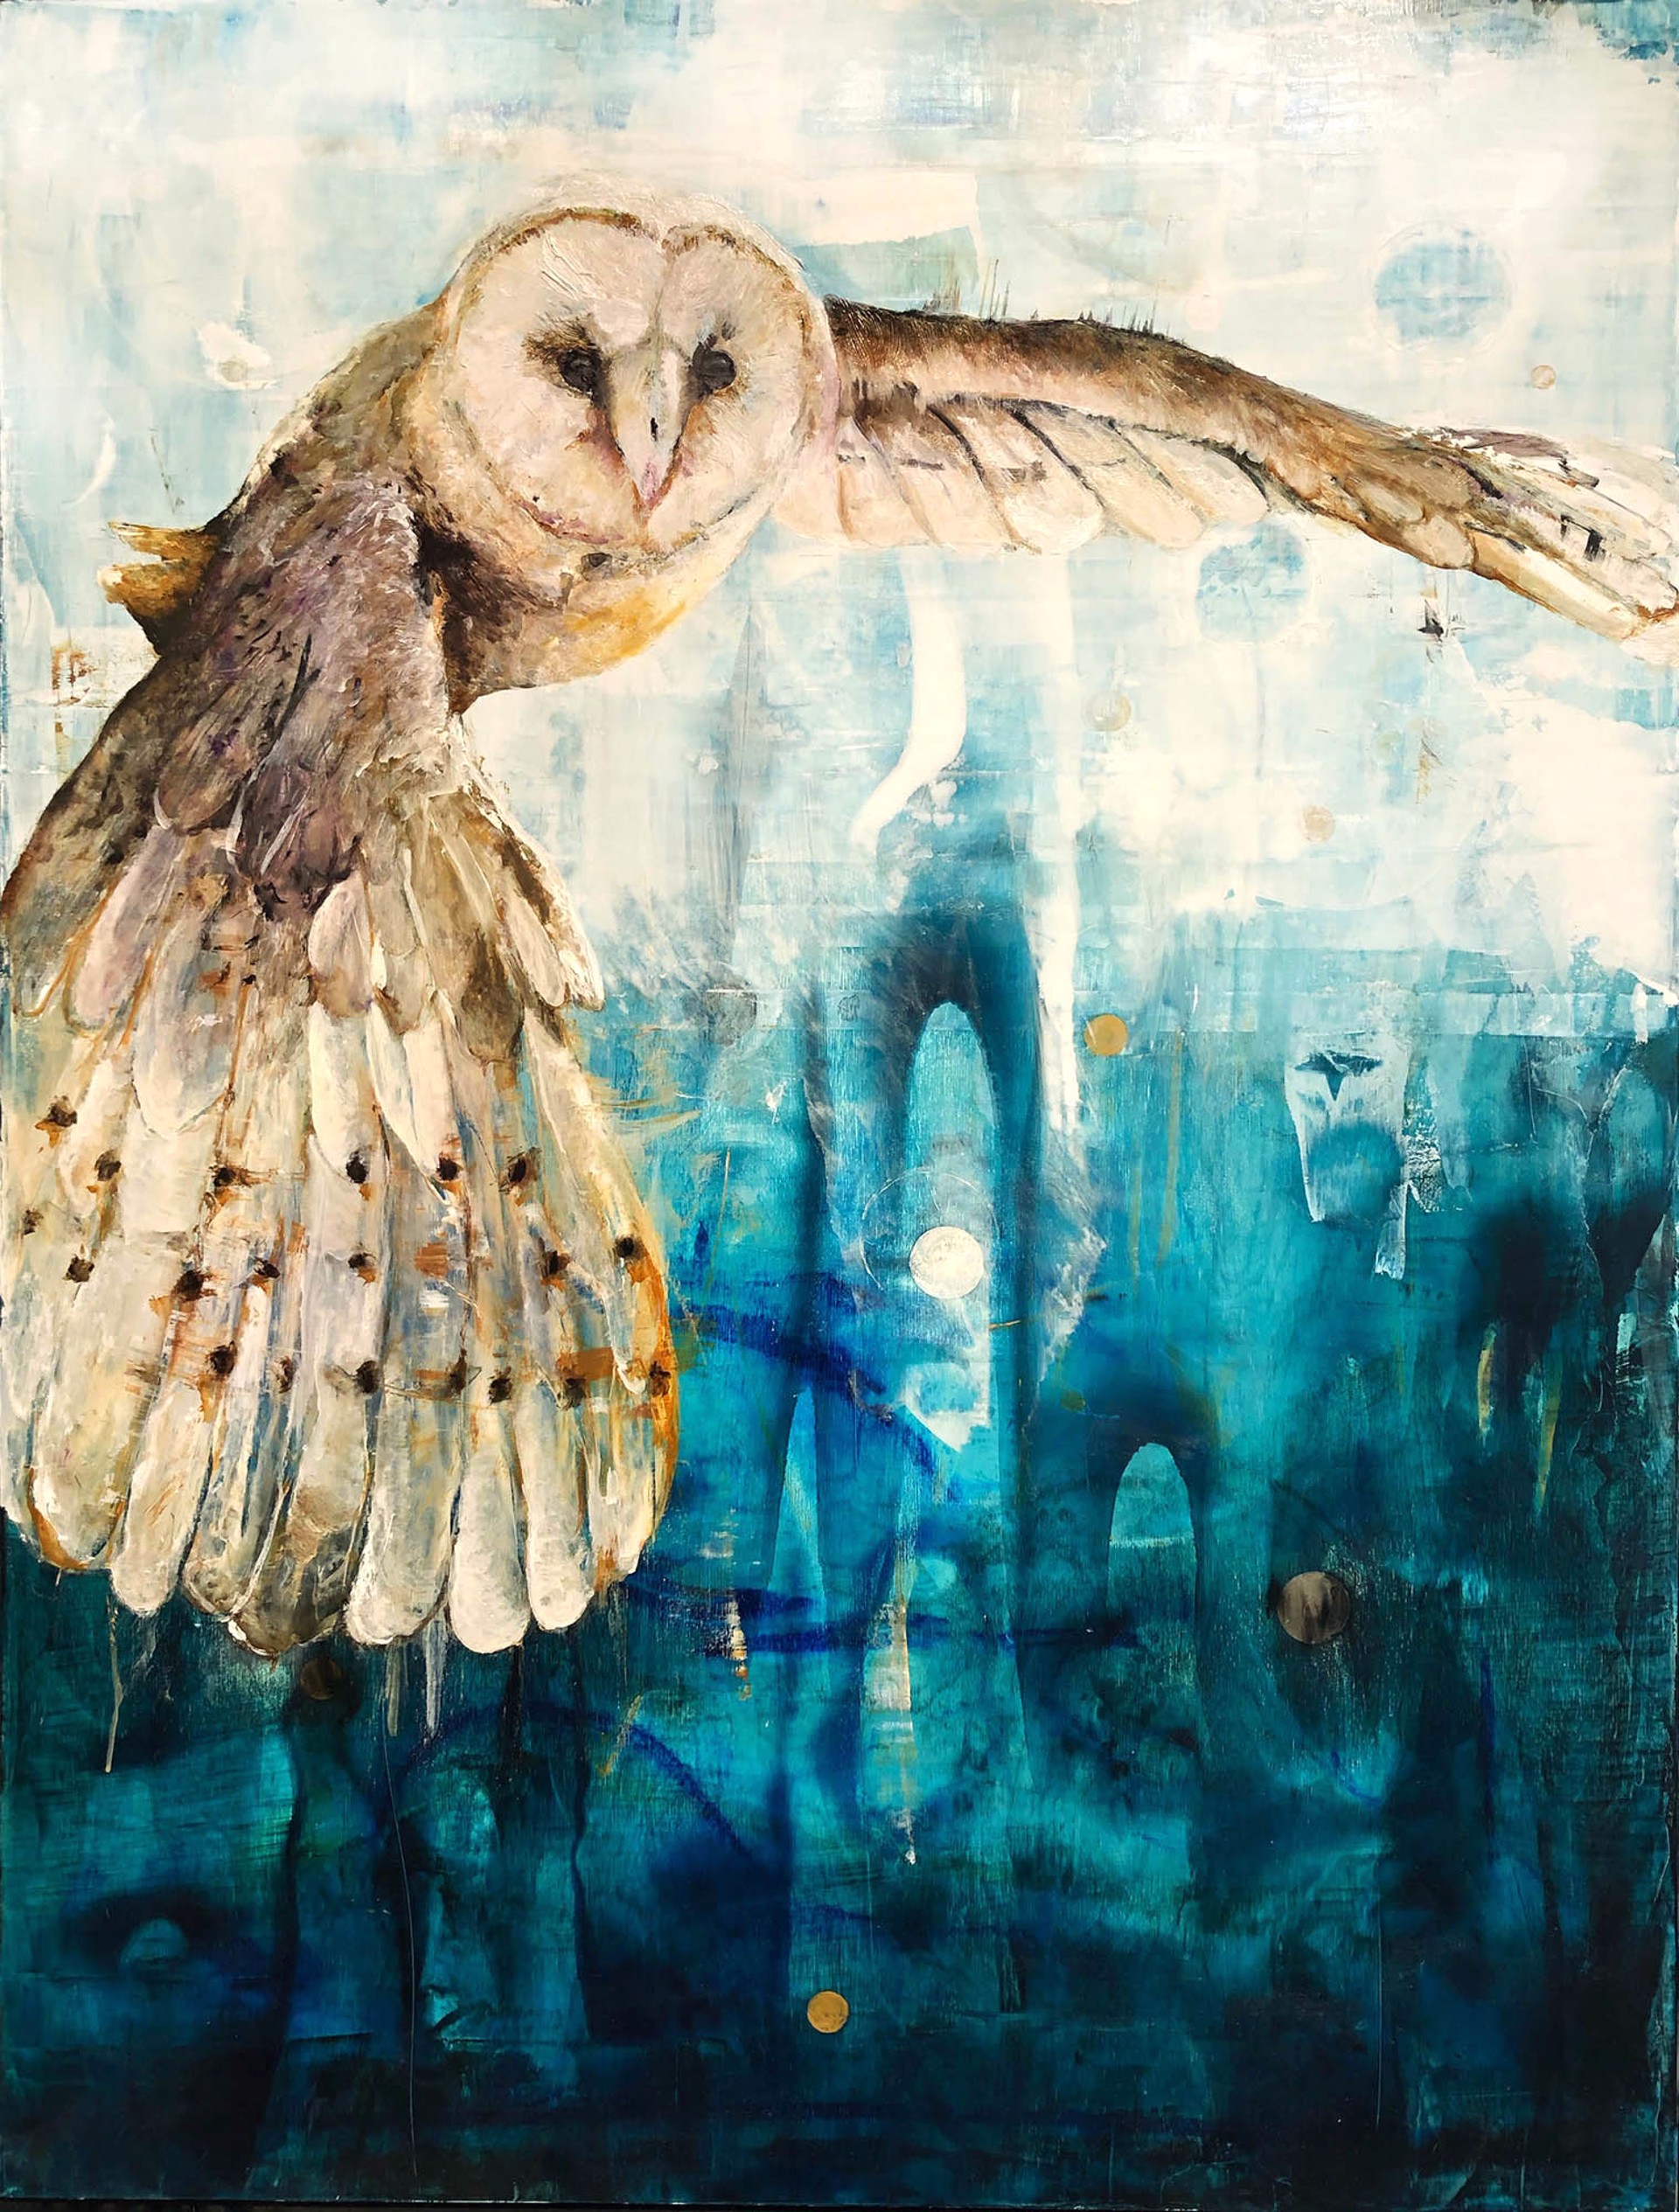 A Contemporary Painting Of A Barn Owl Flying Over An Abstract Night Sky By Jenna Von Benedikt At Gallery Wild